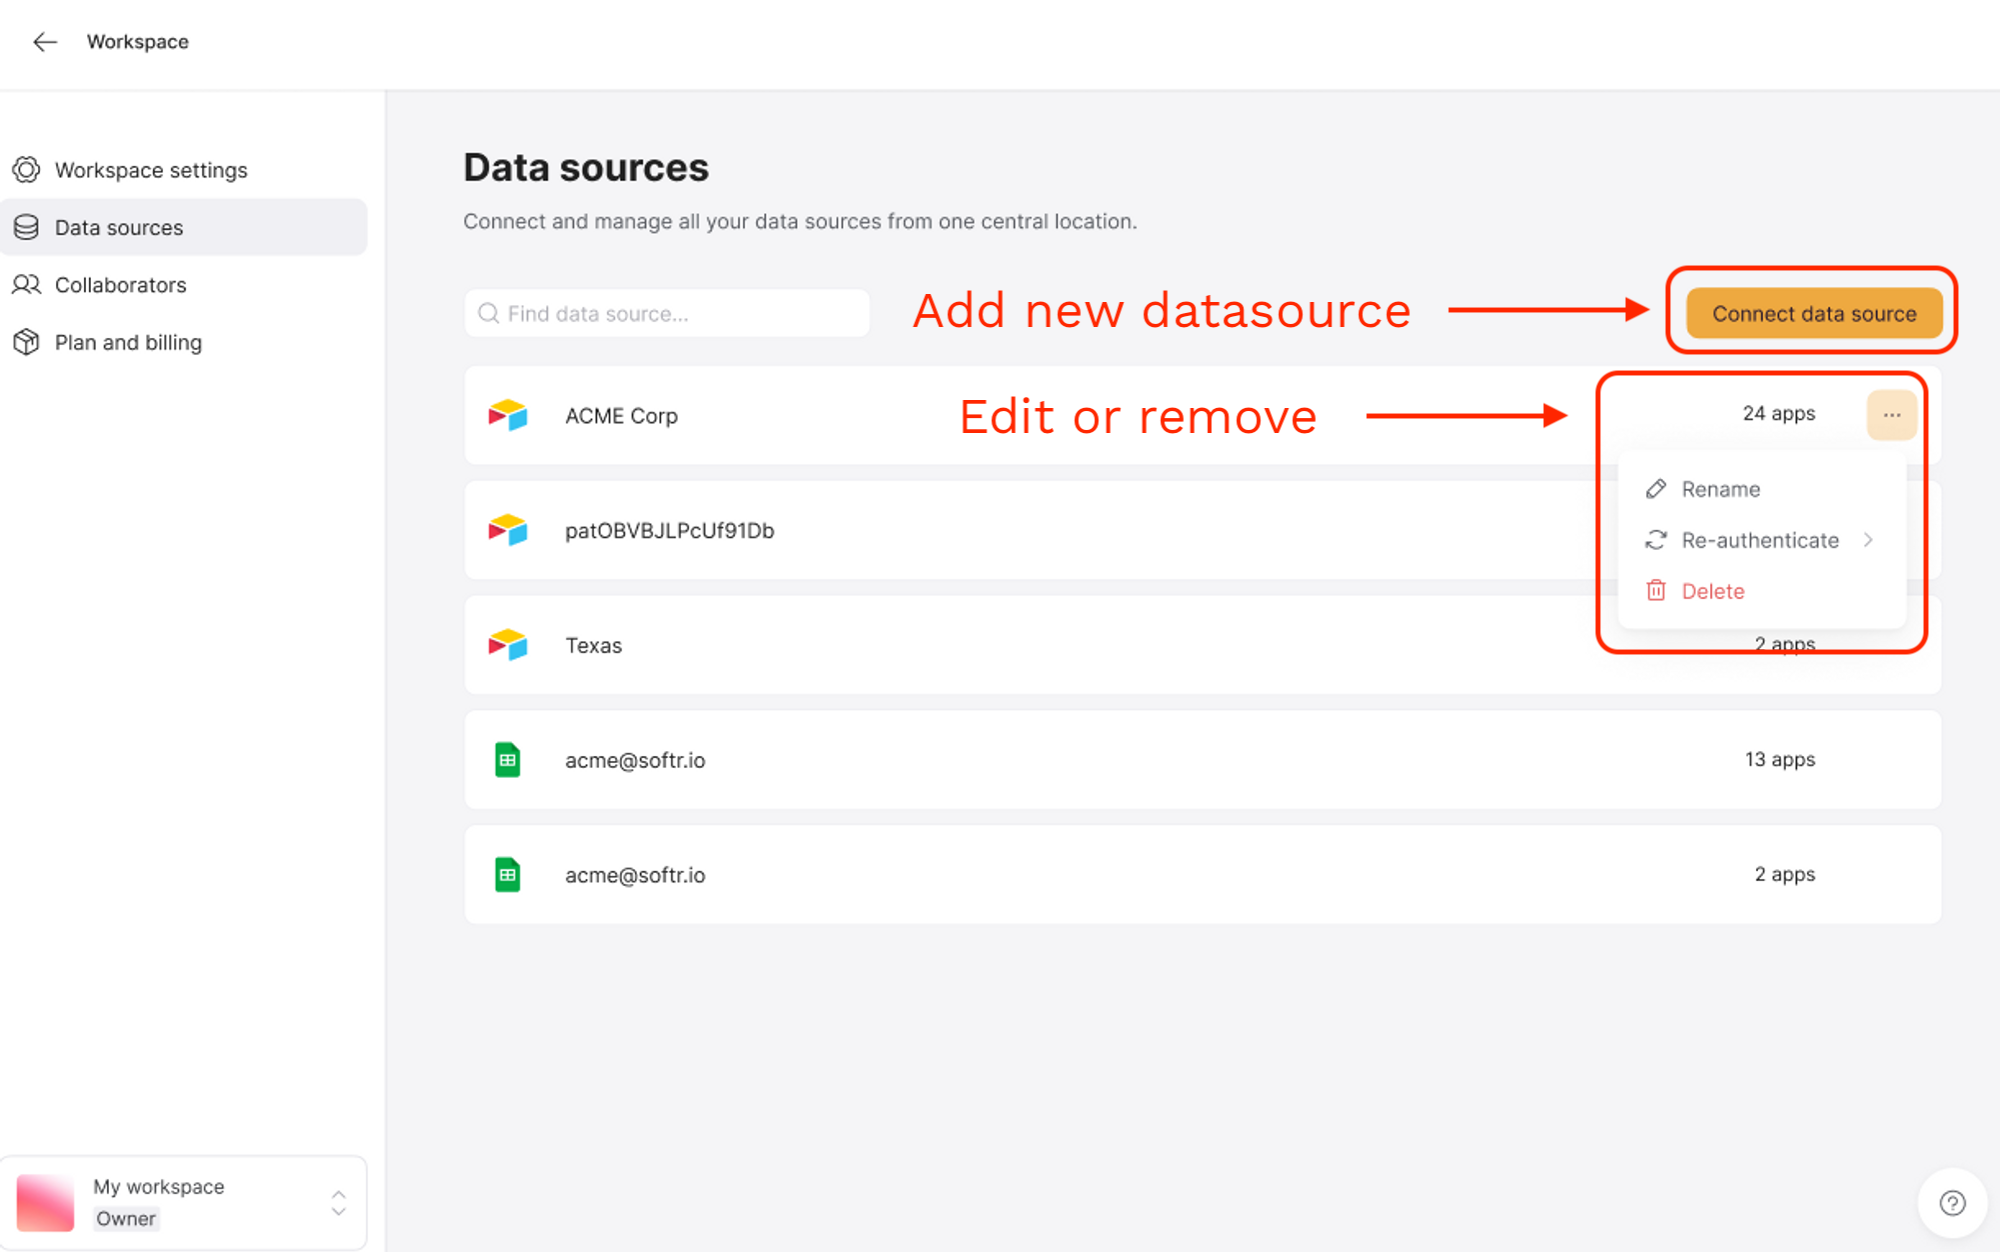 Add, edit, or remove a data source using the buttons on the dashboard